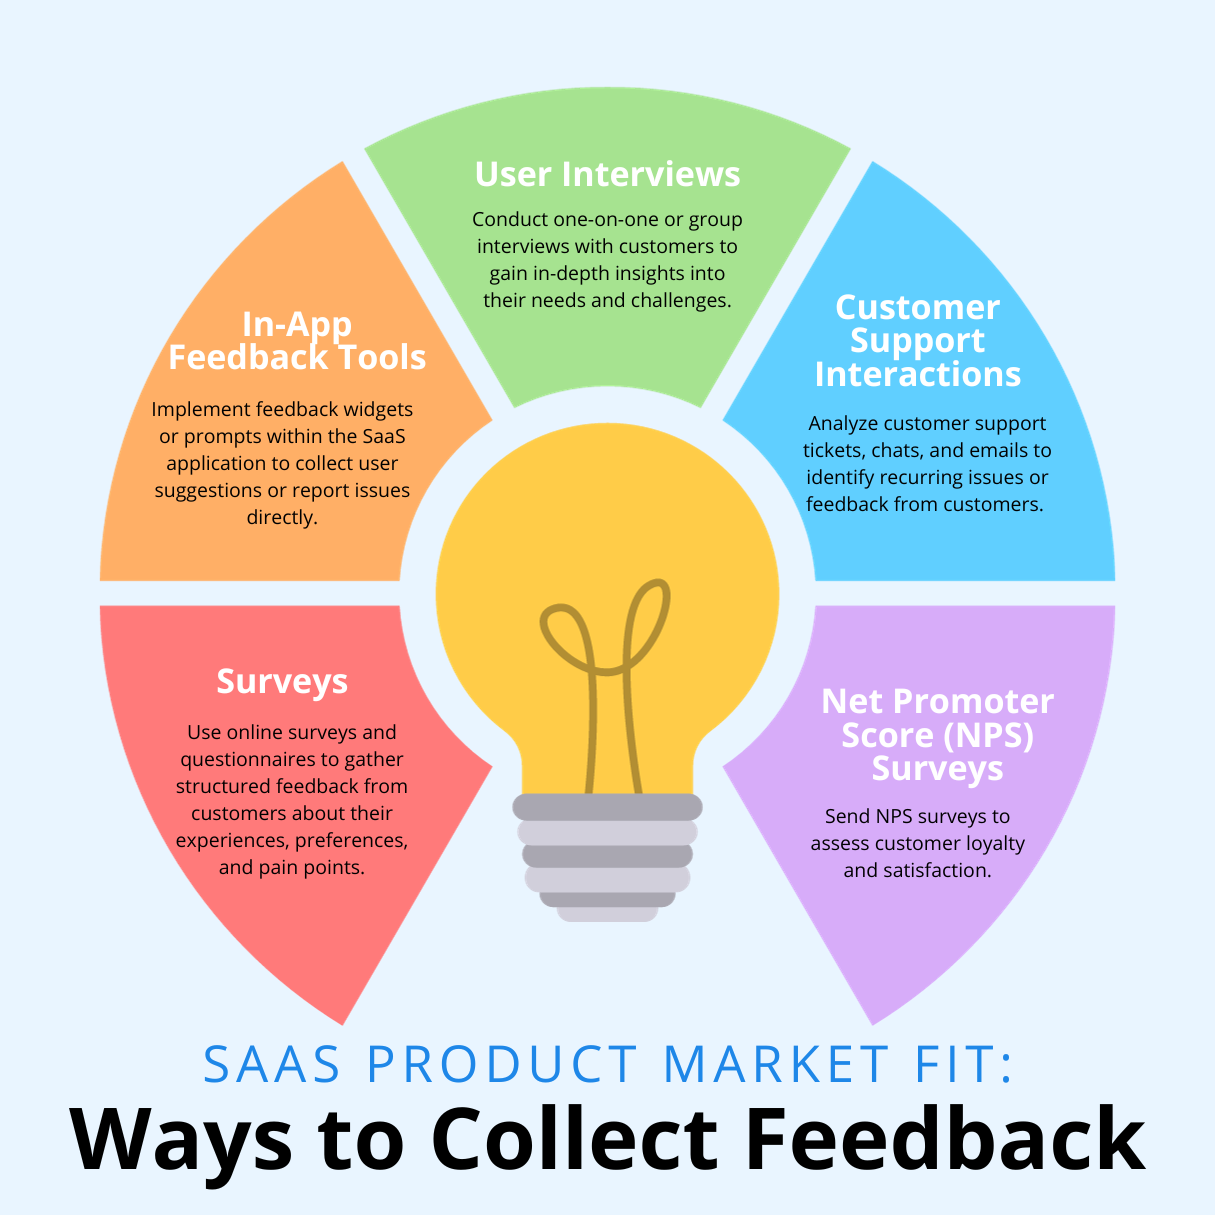 SaaS product market fit: ways to collect feedback. Read the full article for more ways to help you determine your own product market fit.